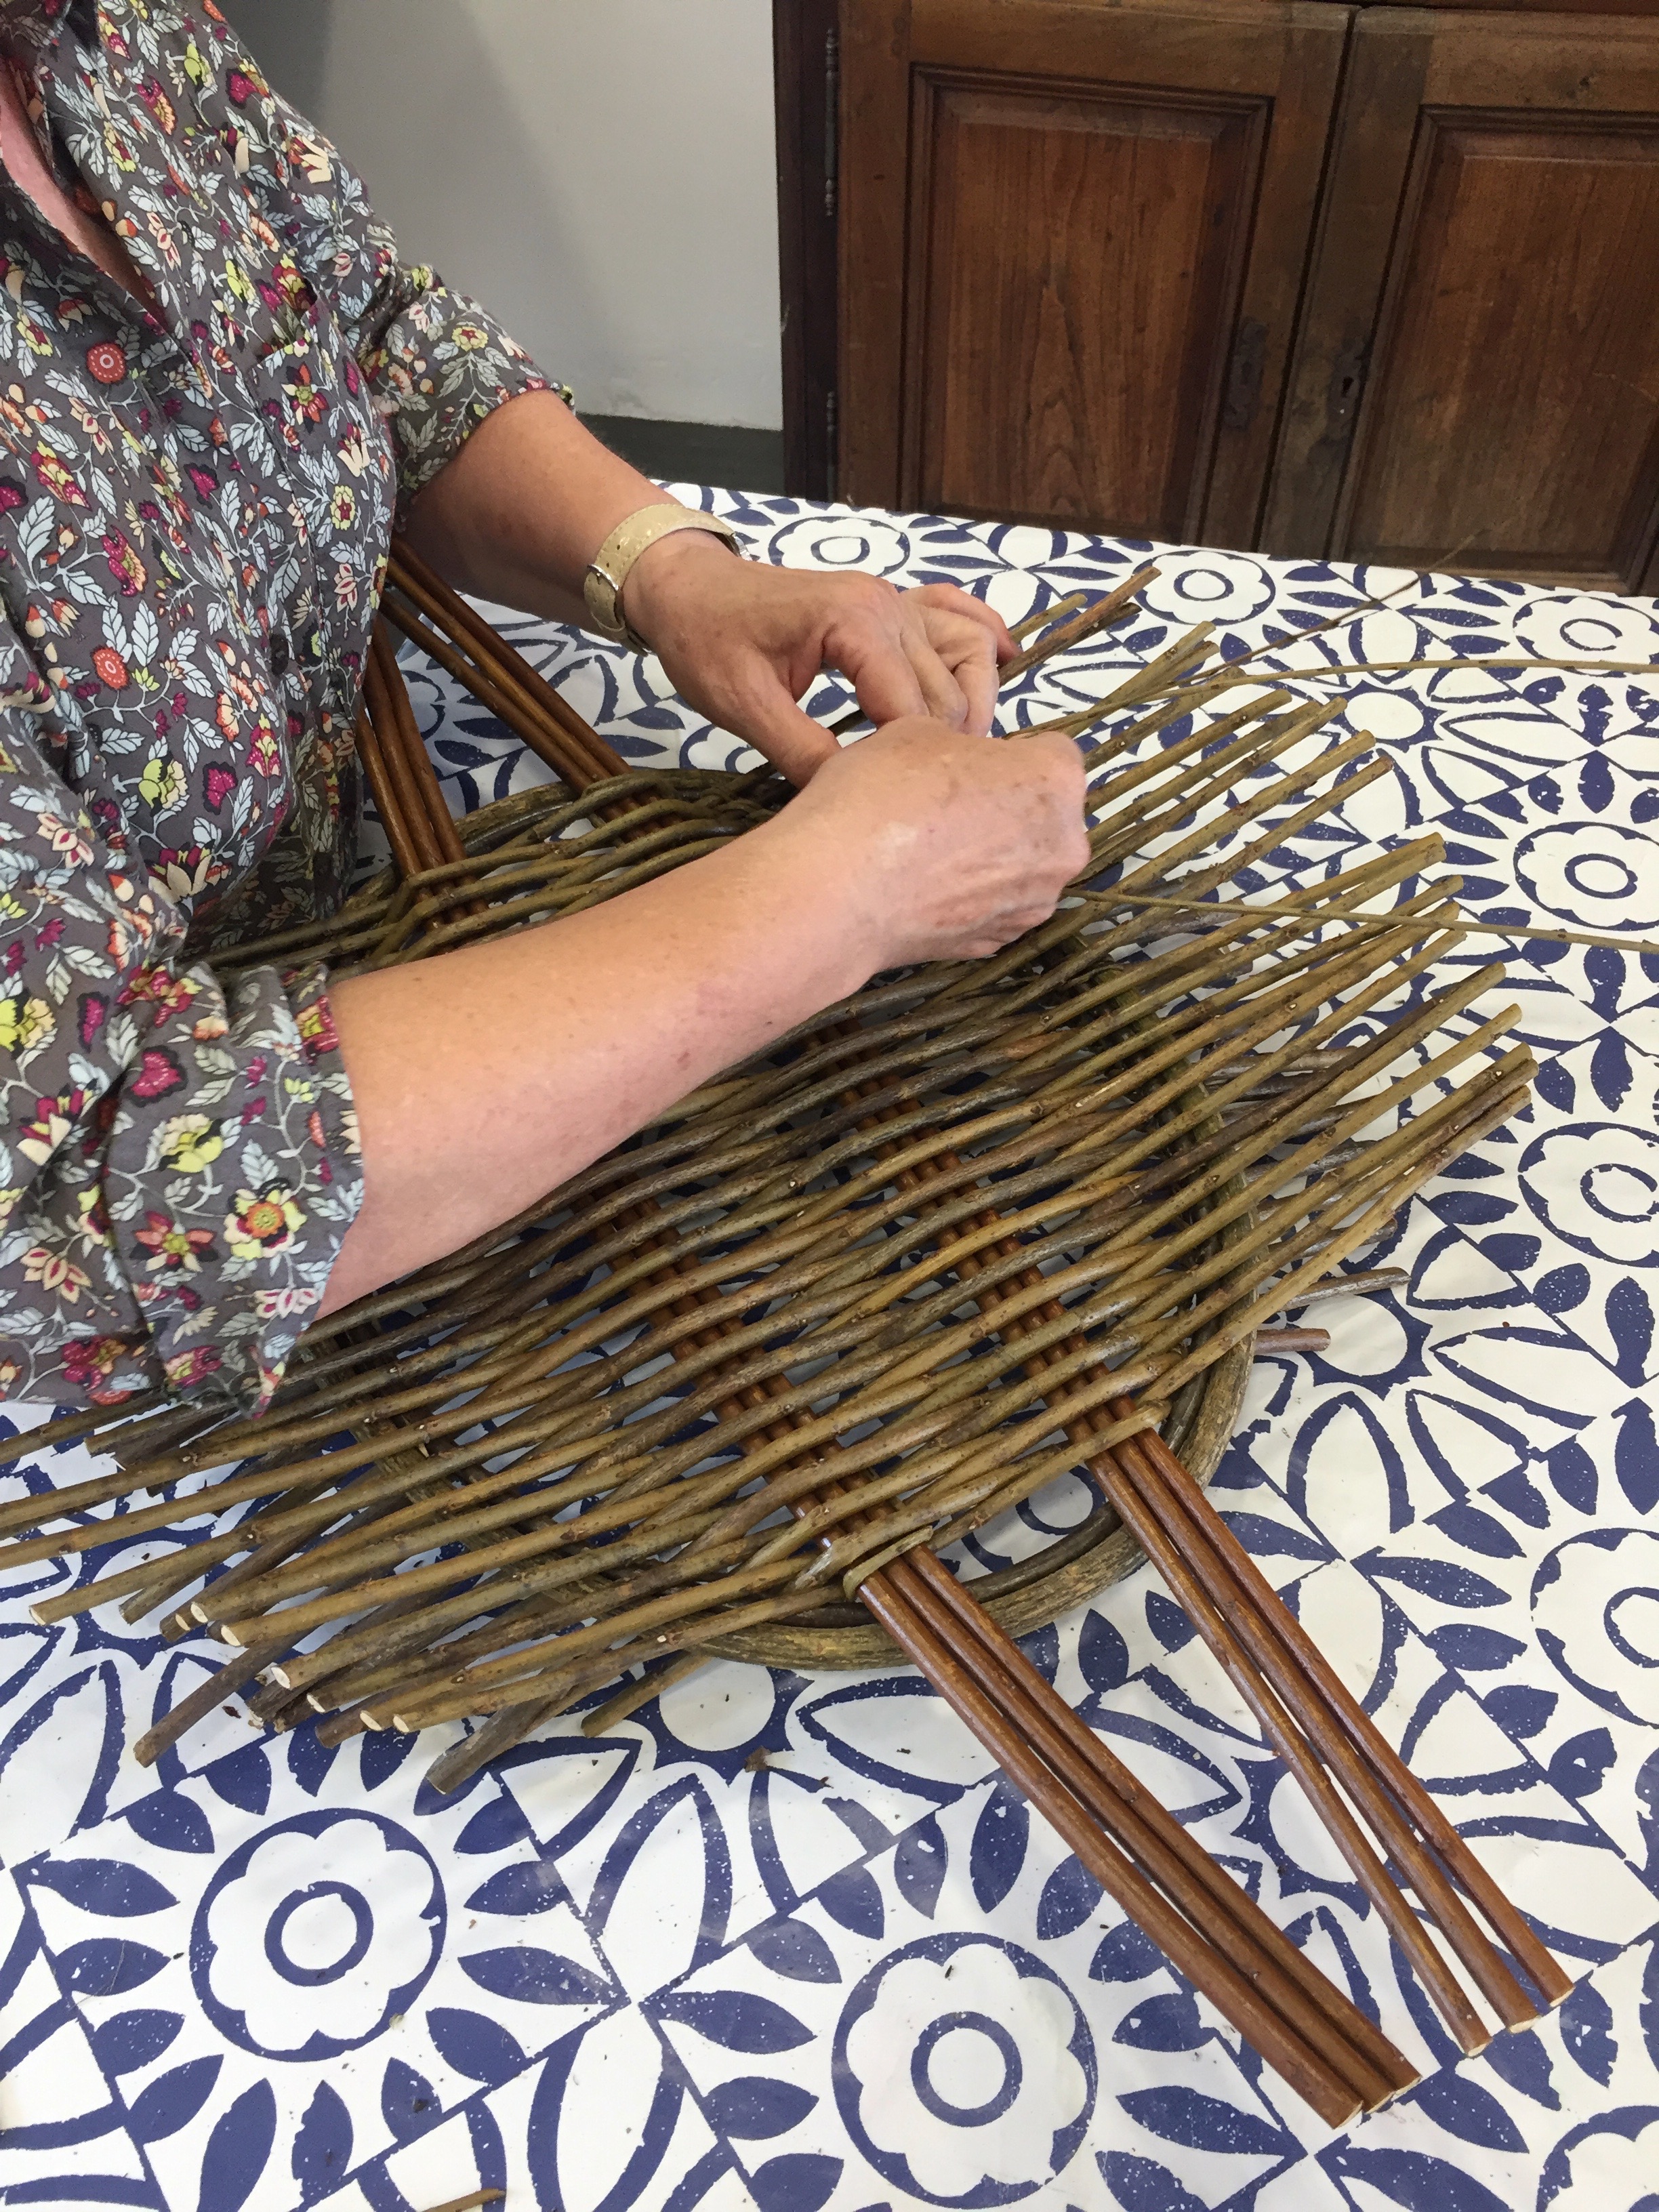 Working on a willow tray.jpg